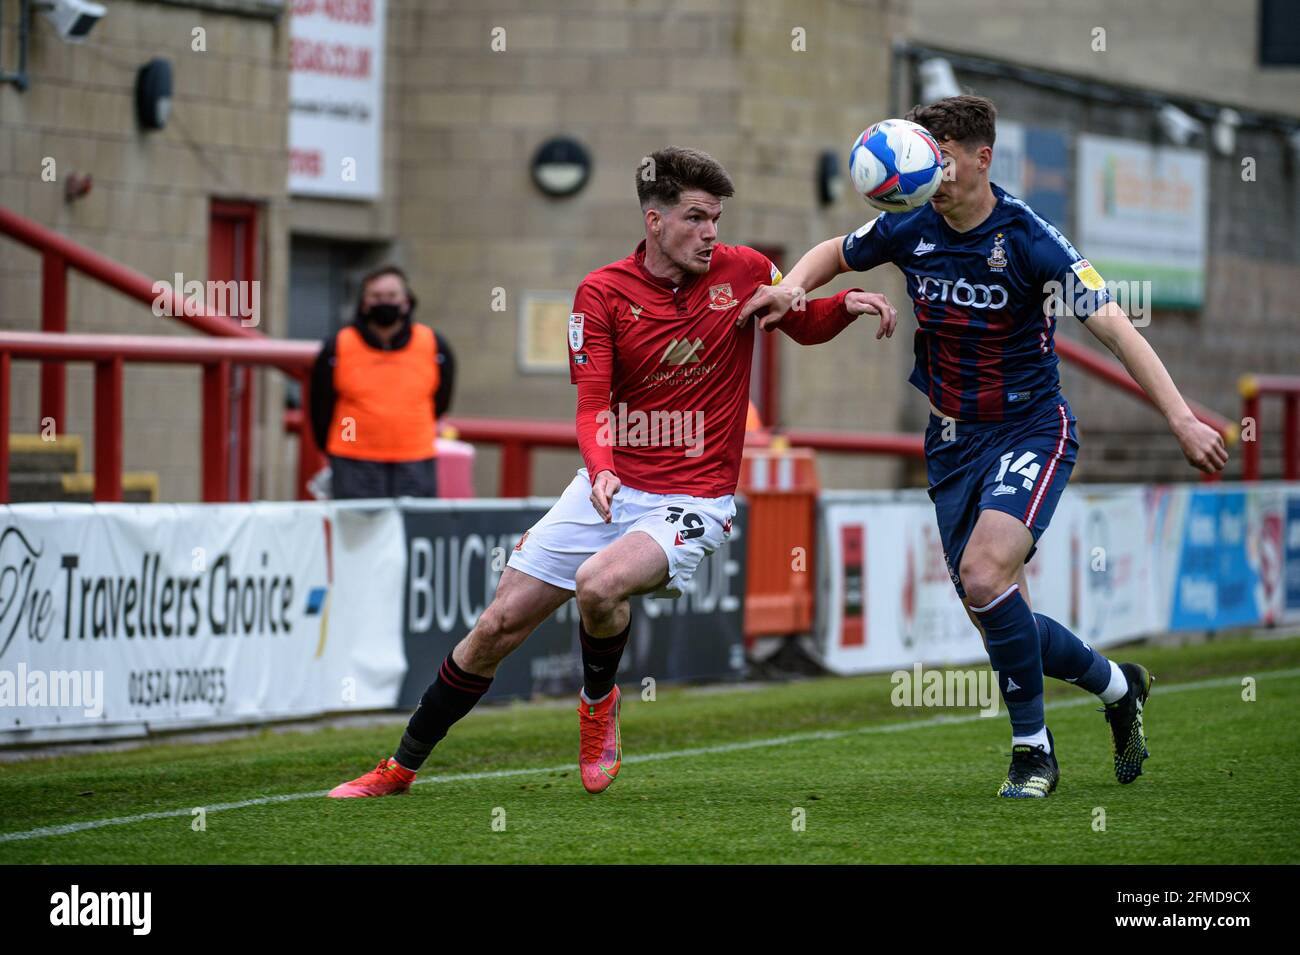 MORECAMBE, UK. MAY 8TH. Paudie O'Connor of Bradford City FC tackles Liam McAlinden of Morecambe FC during the Sky Bet League 2 match between Morecambe and Bradford City at the Globe Arena, Morecambe on Saturday 8th May 2021. (Credit: Ian Charles | MI News) Credit: MI News & Sport /Alamy Live News Stock Photo